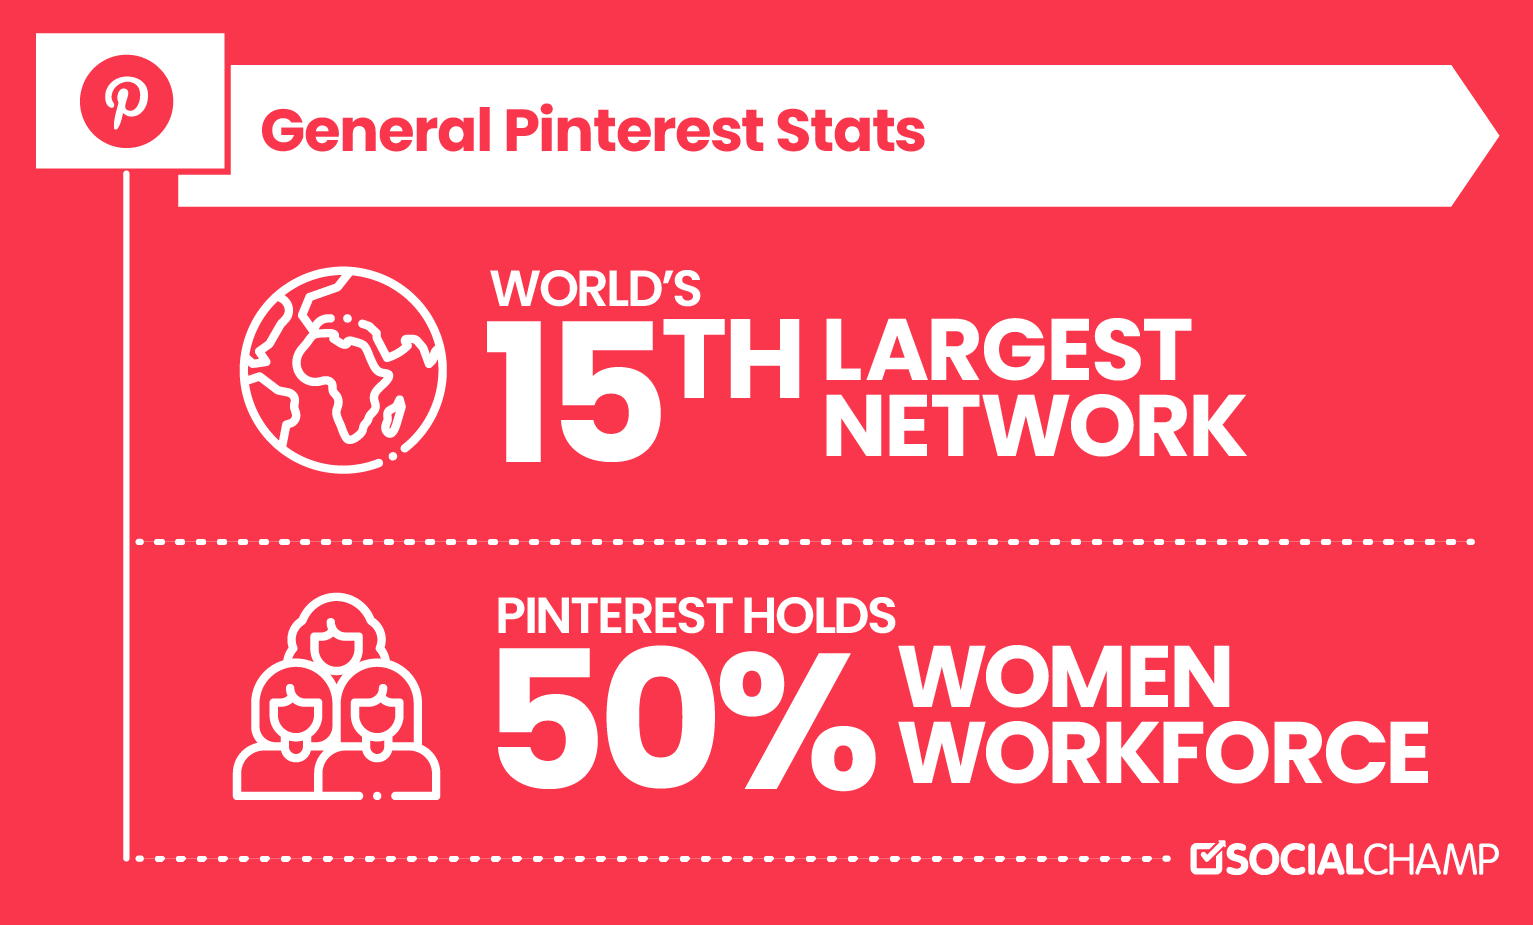 18 Convincing Pinterest Statistics You Can't Miss in 1822